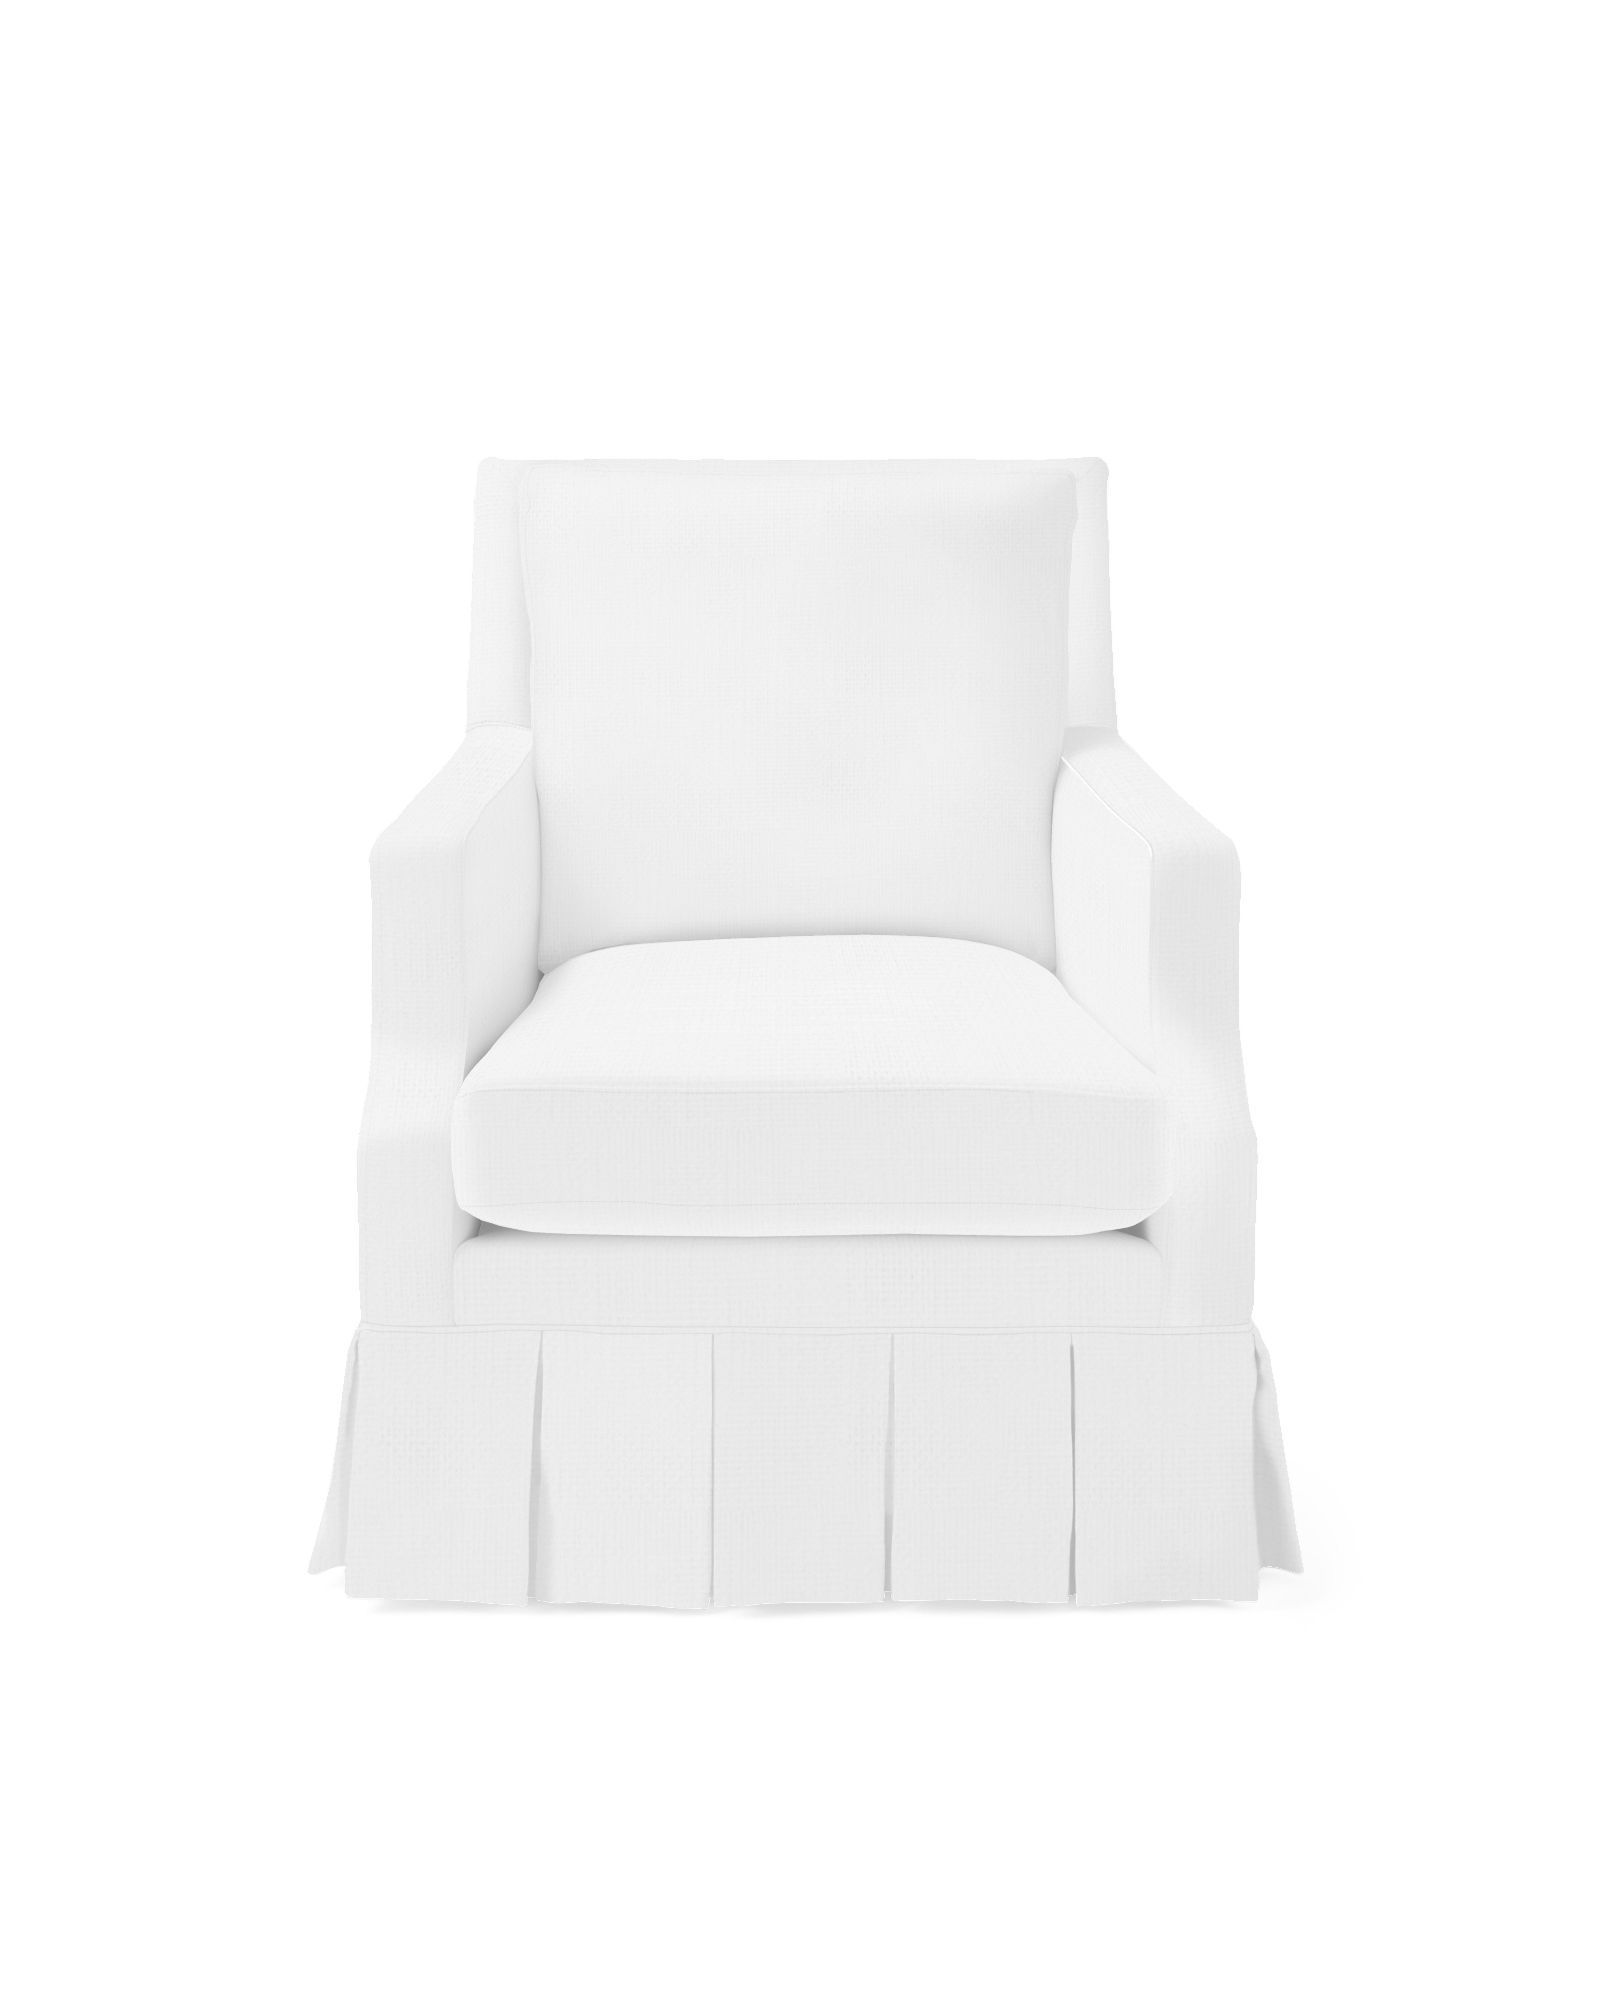 Grady Pleated Chair | Serena and Lily